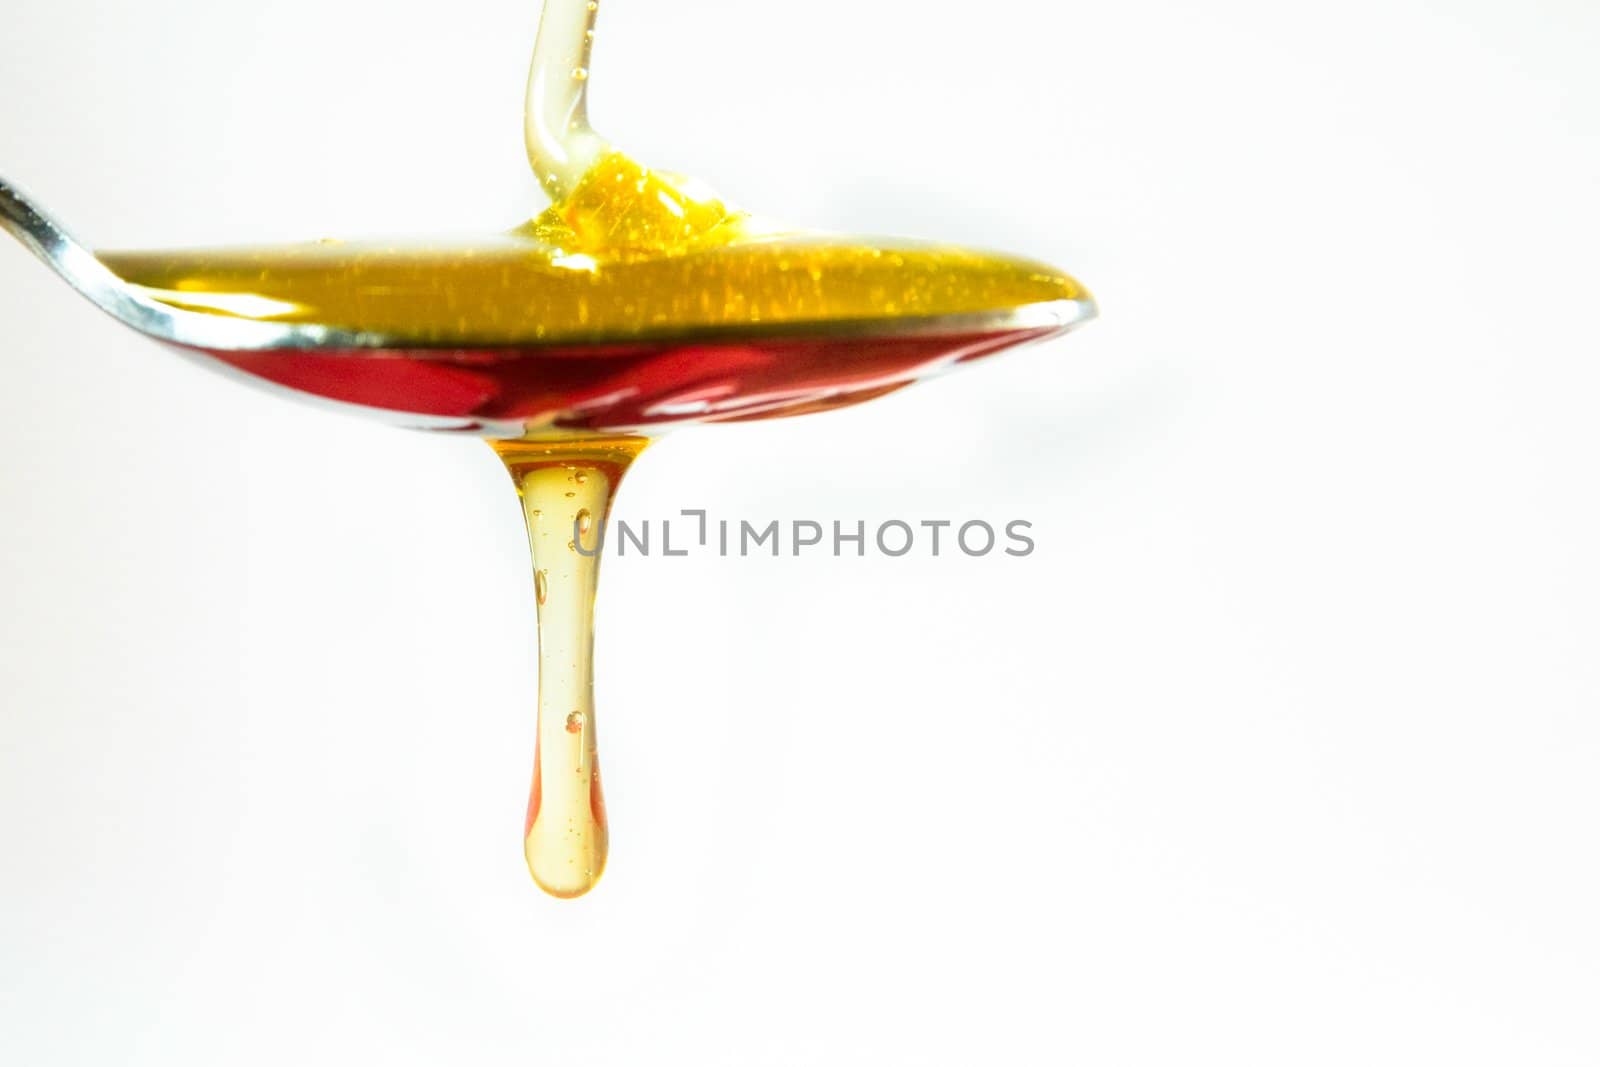 honey in a spoon on white background by chrisroll